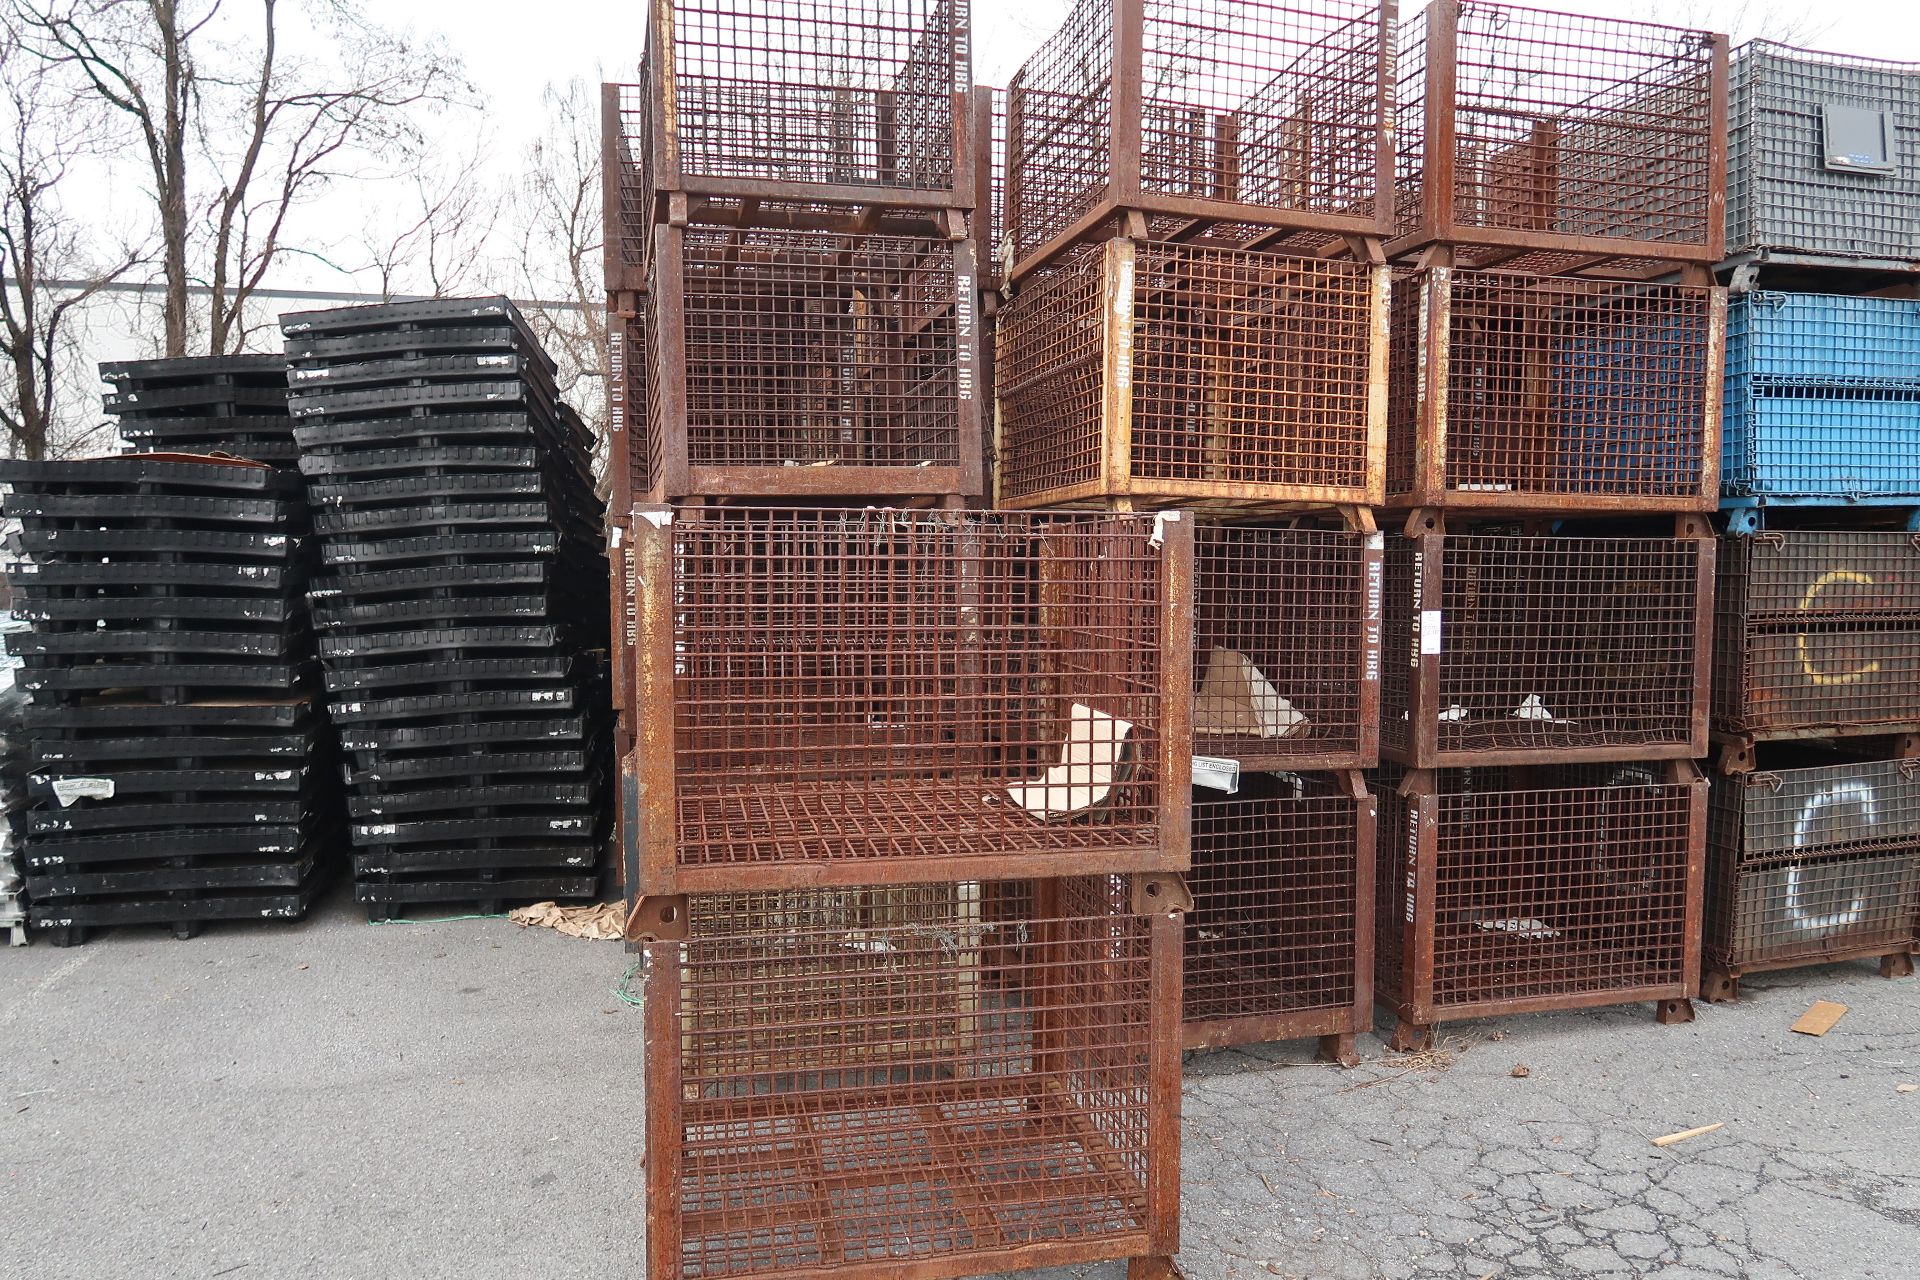 Large assortment of wire cages